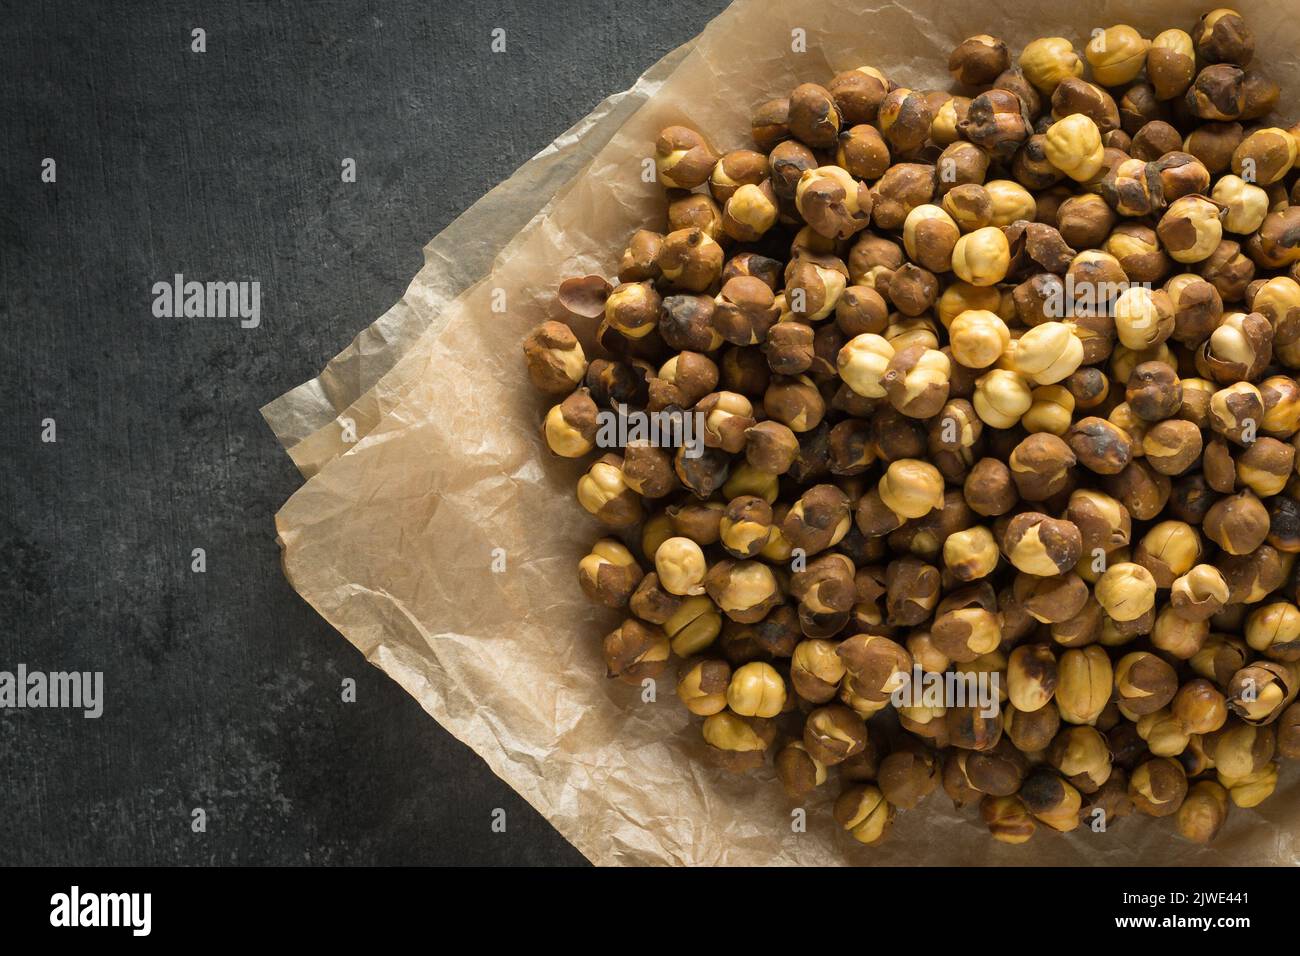 pile of roasted and salted black chickpeas, also known as bengal gram or desi chickpea, traditional and native oil free snack of india, Stock Photo